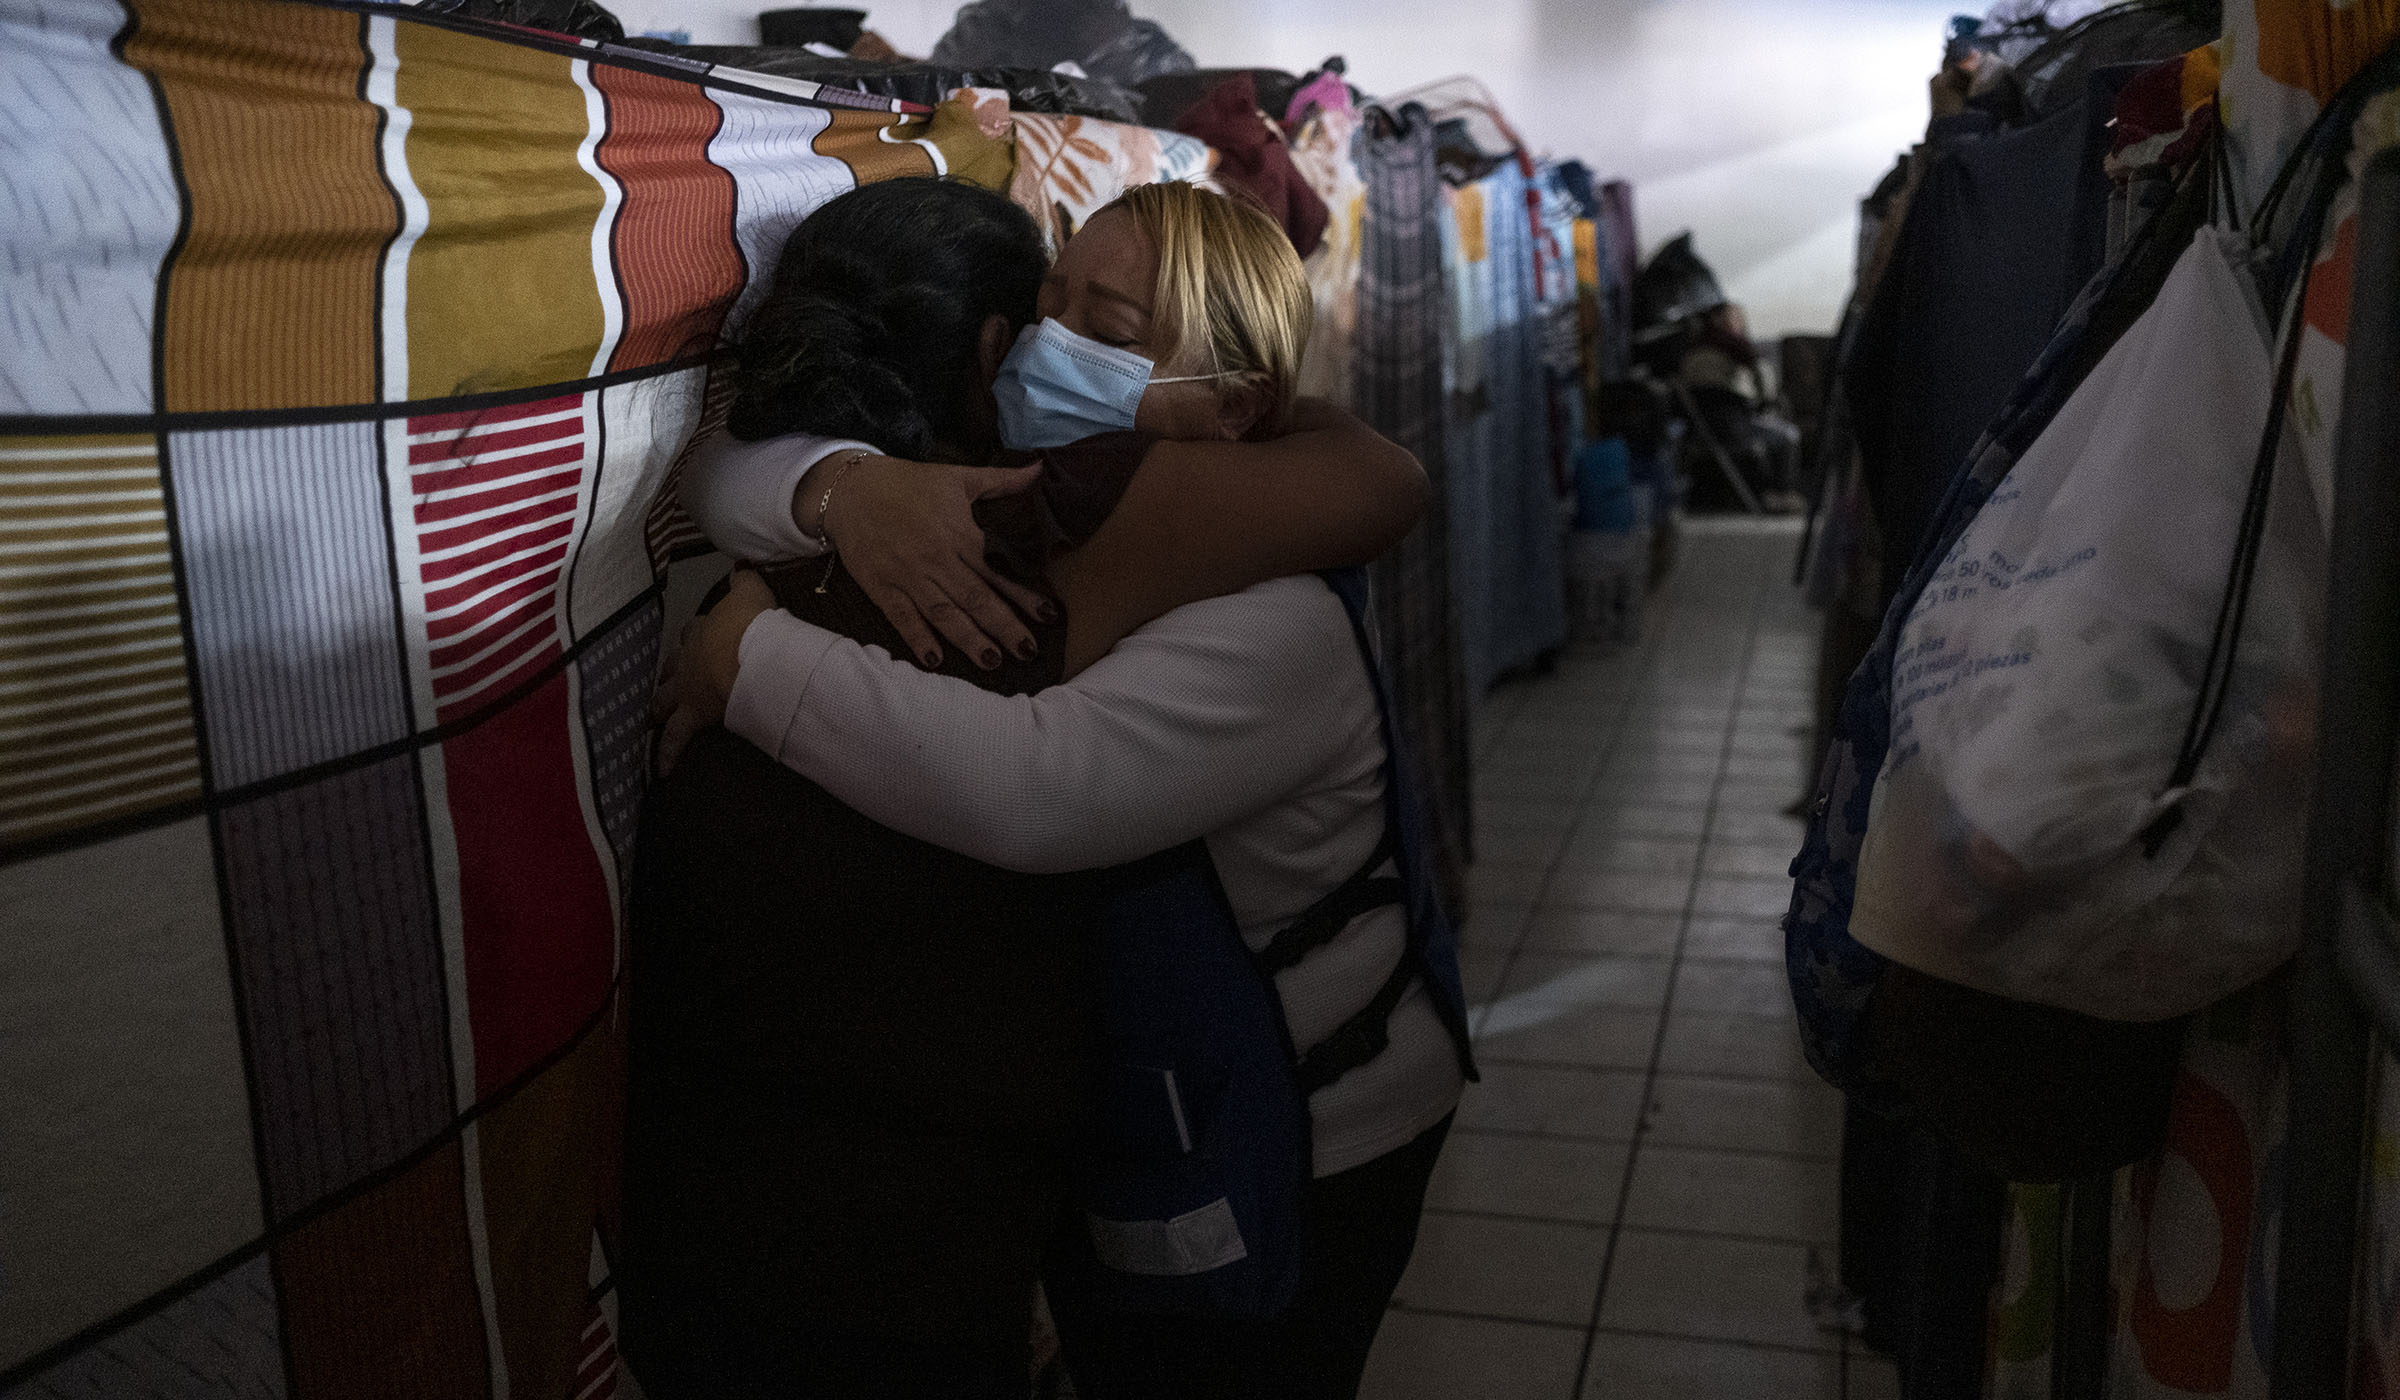 A HIAS staffer (right) hugs Juny Araceli Lopez (51), an asylum seeker from Guatemala, at the Embajadores de Jesus migrant shelter in Tijuana, Baja California state, Mexico, on February 17, 2022. Lopez’s 14 year old son, Justin Orlando, was assassinated by mara gangsters while walking with Juny to a grocery store in August 2021. According to Mrs. Lopez, the gangsters killed her son because he refused to work for them. “He never told me the maras were after him because he was trying to protect me, so I couldn’t do anything to save him,” she said. As soon as she recovered from the gun injuries she suffered during the attack, Juny fled Guatemala with her eldest son and family, heading for the United States. She and her family arrived in Tijuana on December 2021, where now they are stranded until US migration authorities resume asylum processes. (Guillermo Arias for HIAS)